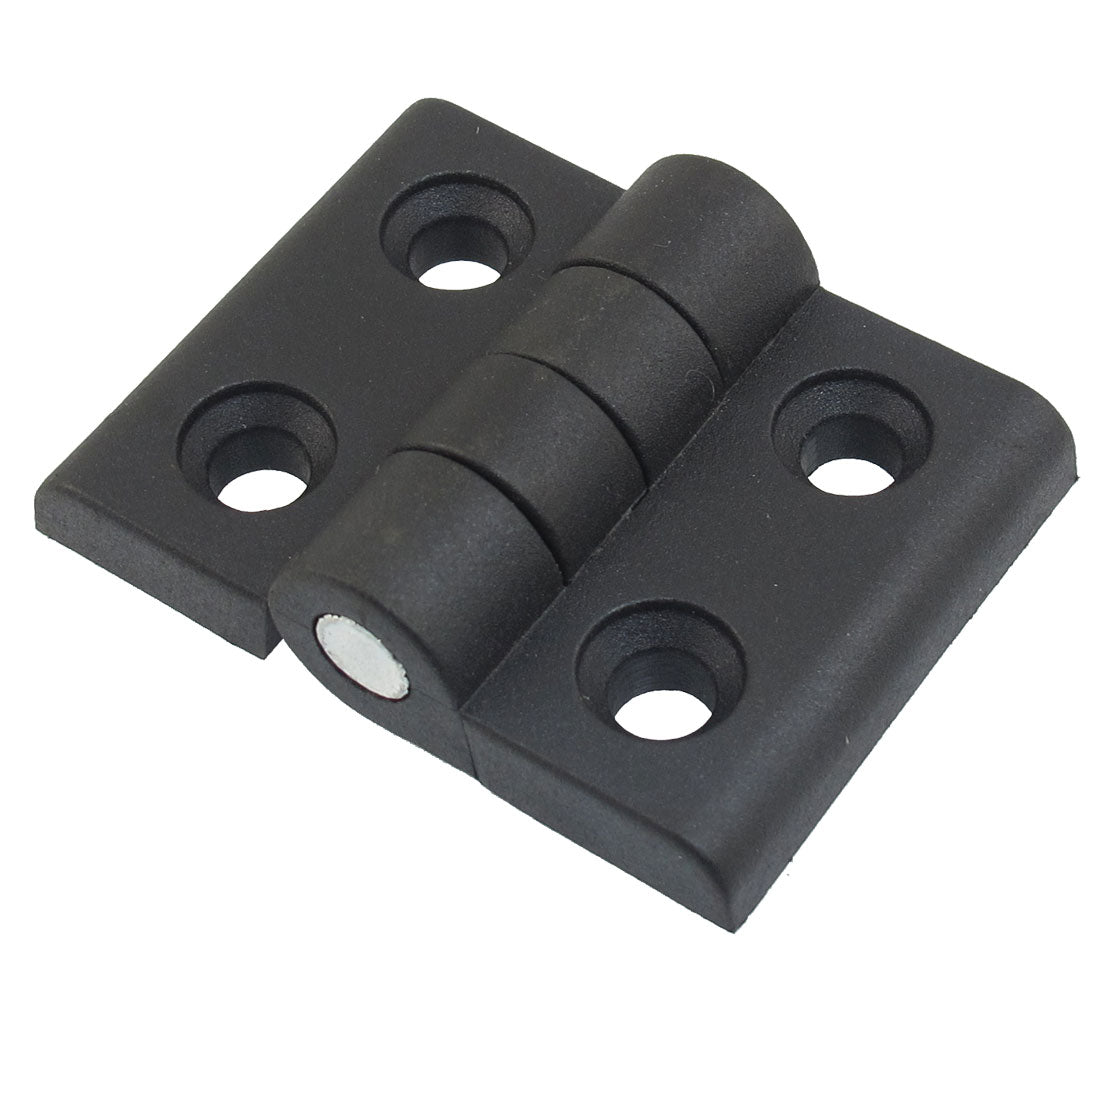 uxcell Uxcell Reinforced Black Plastic Countersunk Hole Hinge 7.3mm